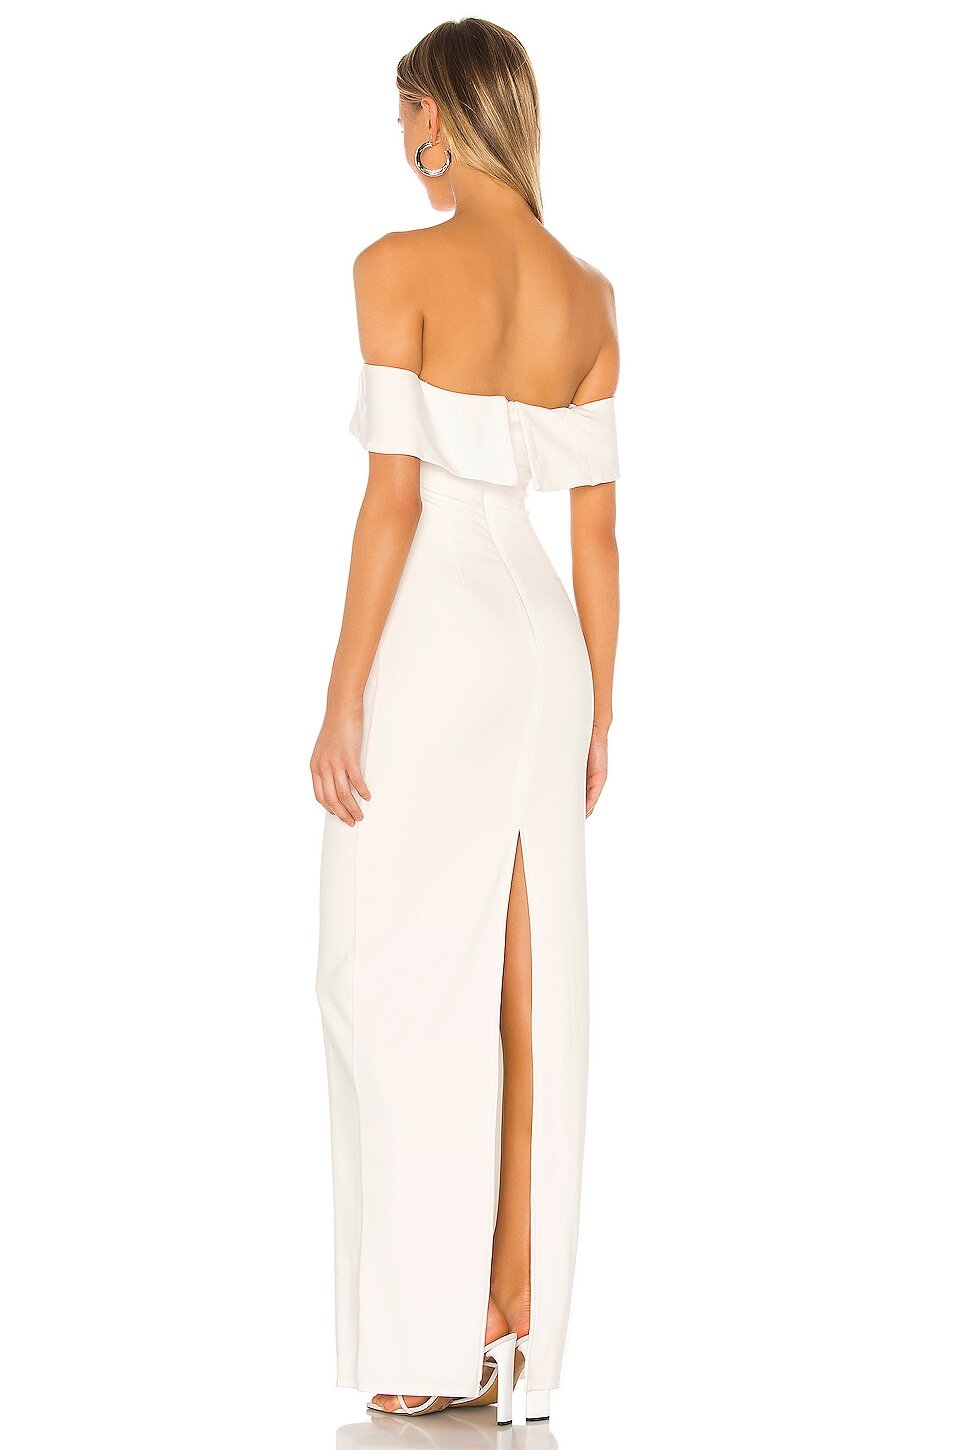 Lovers and Friends - Galleria Gown - White